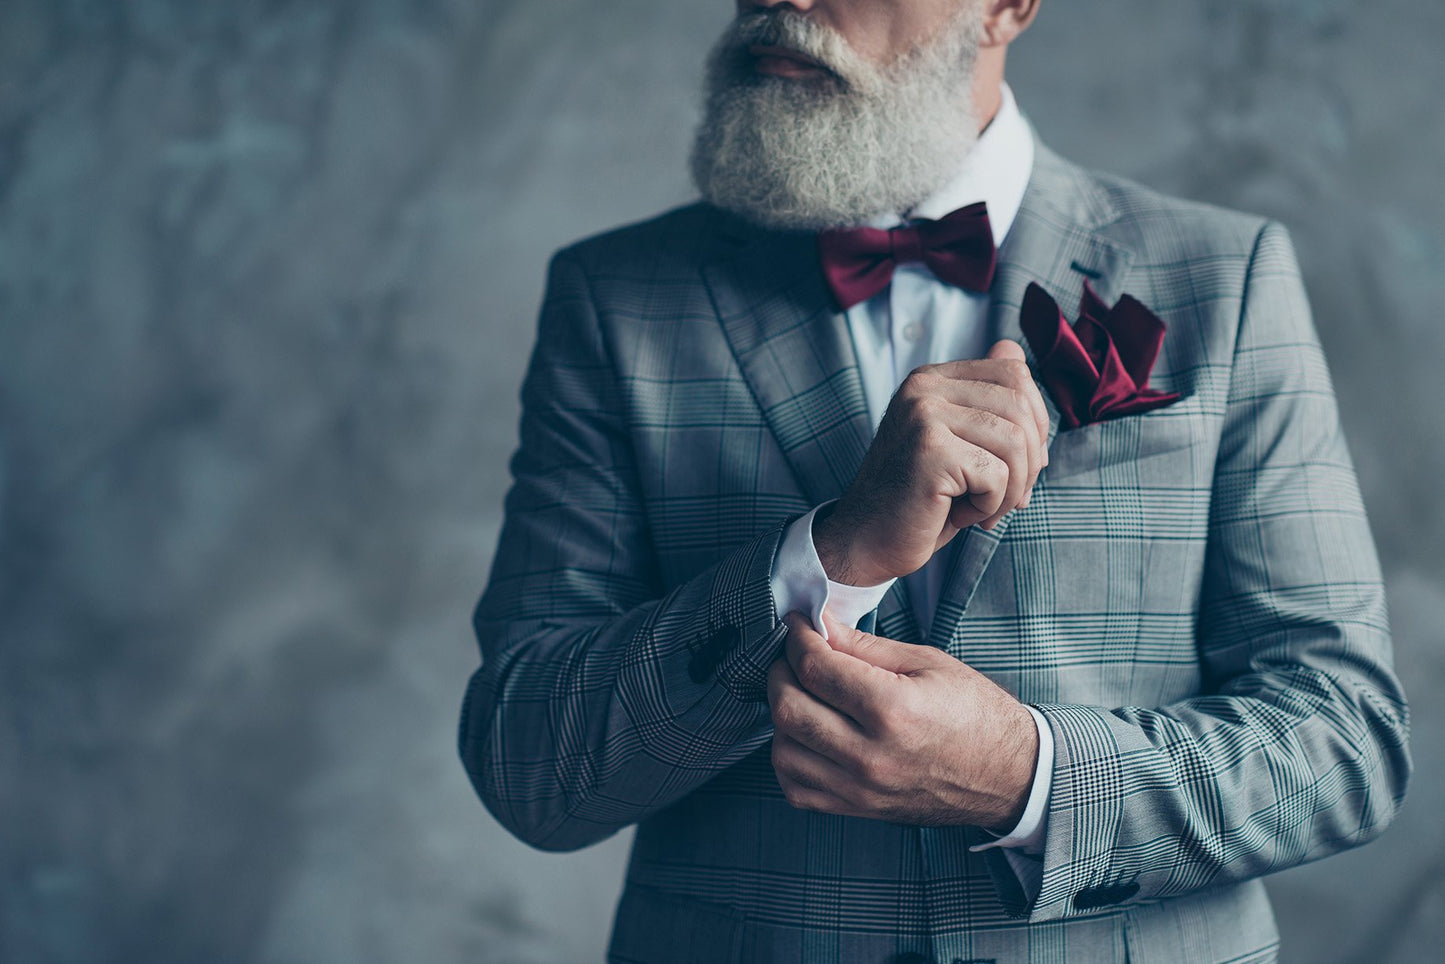 The Gentleman's Gifting Guide